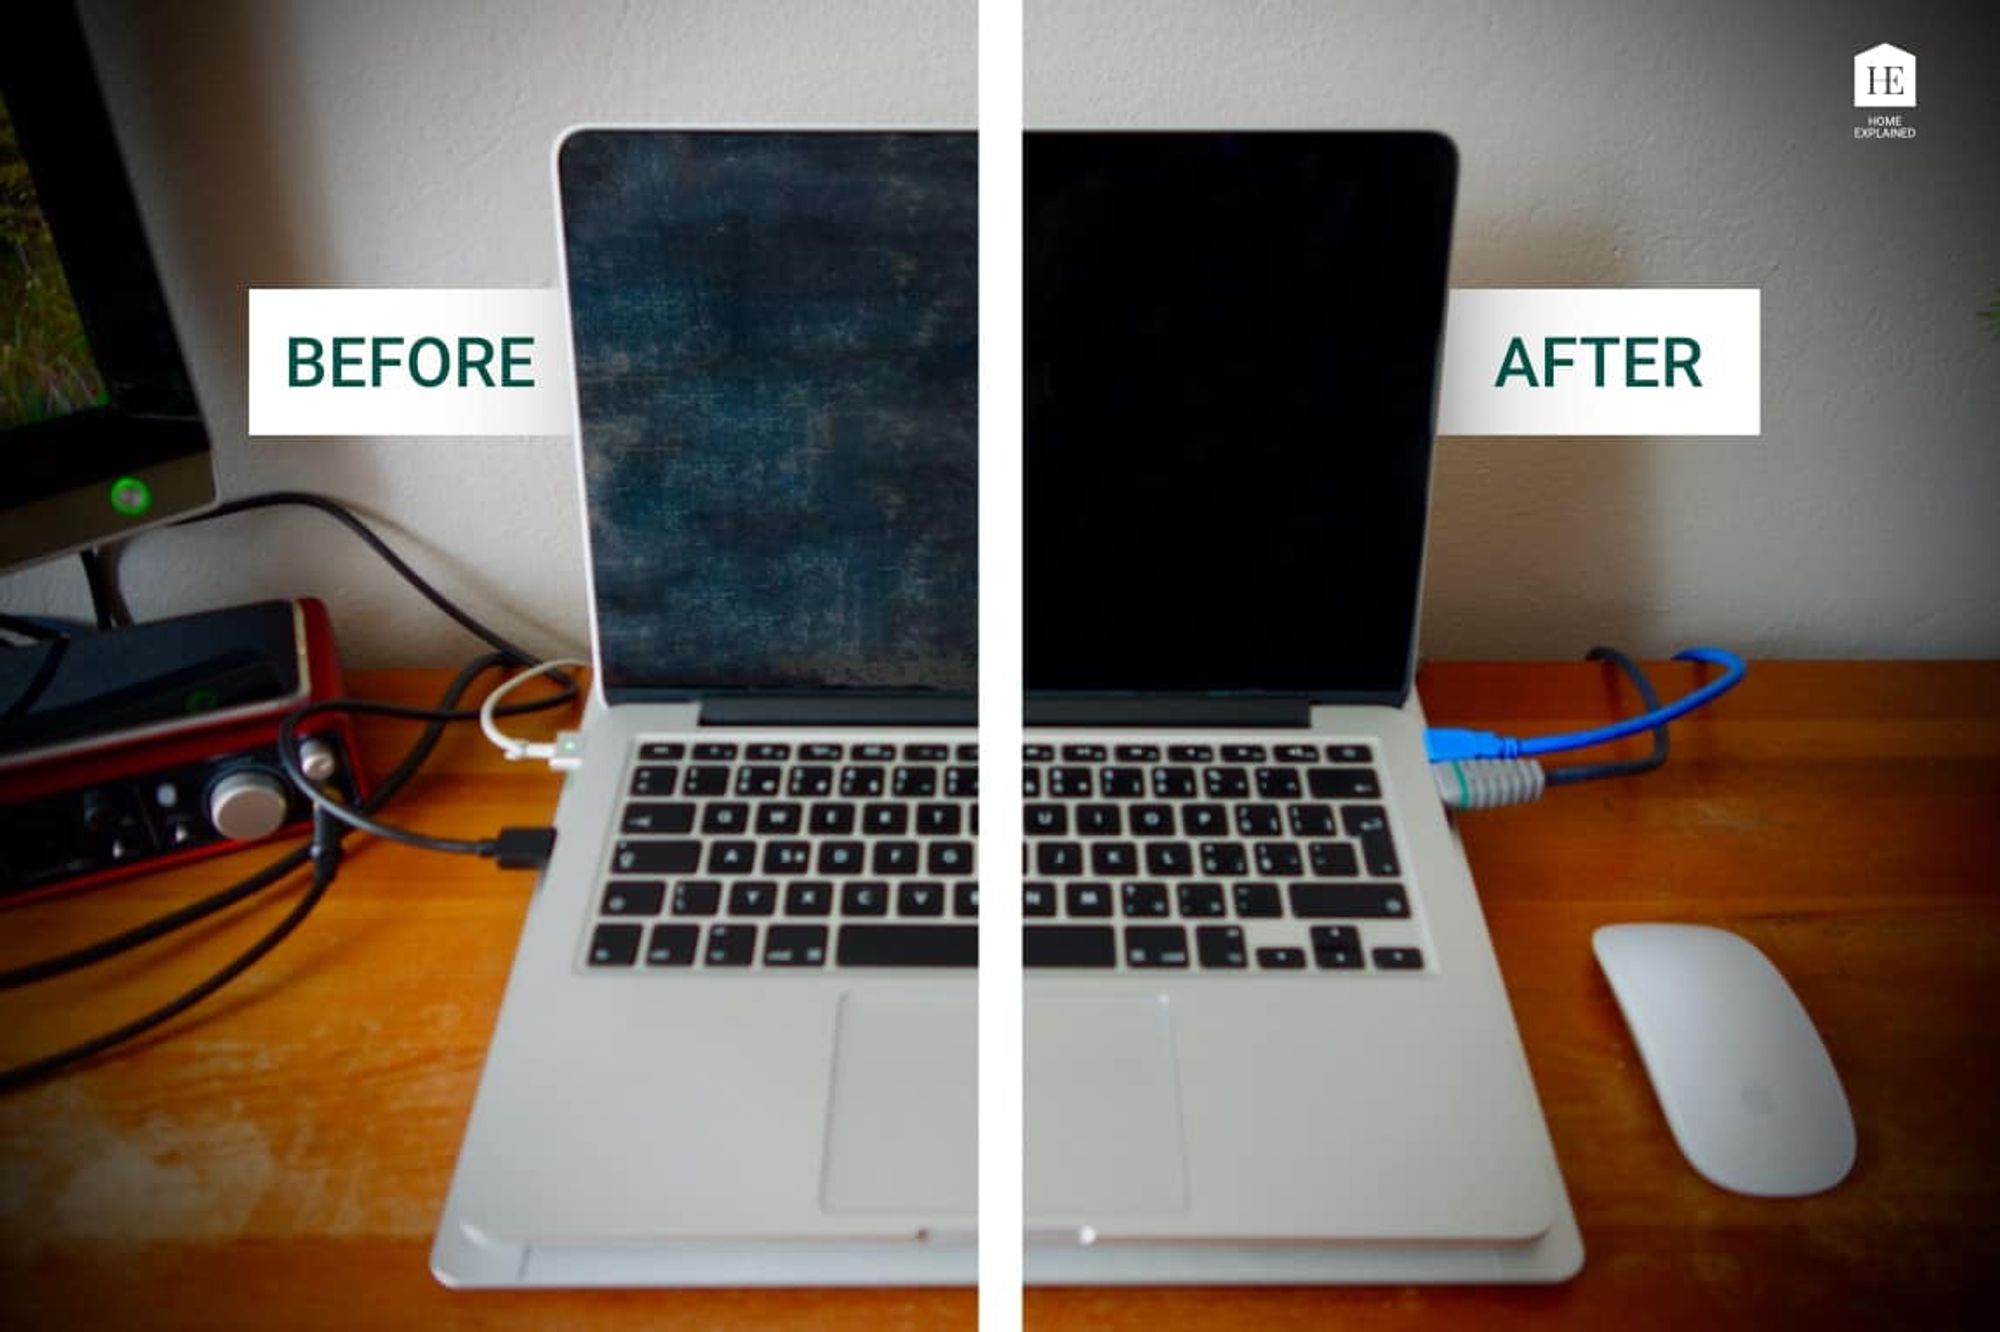 How to remove anti-reflective coating from MacBook Pro - The best and easiest way - Home Explained